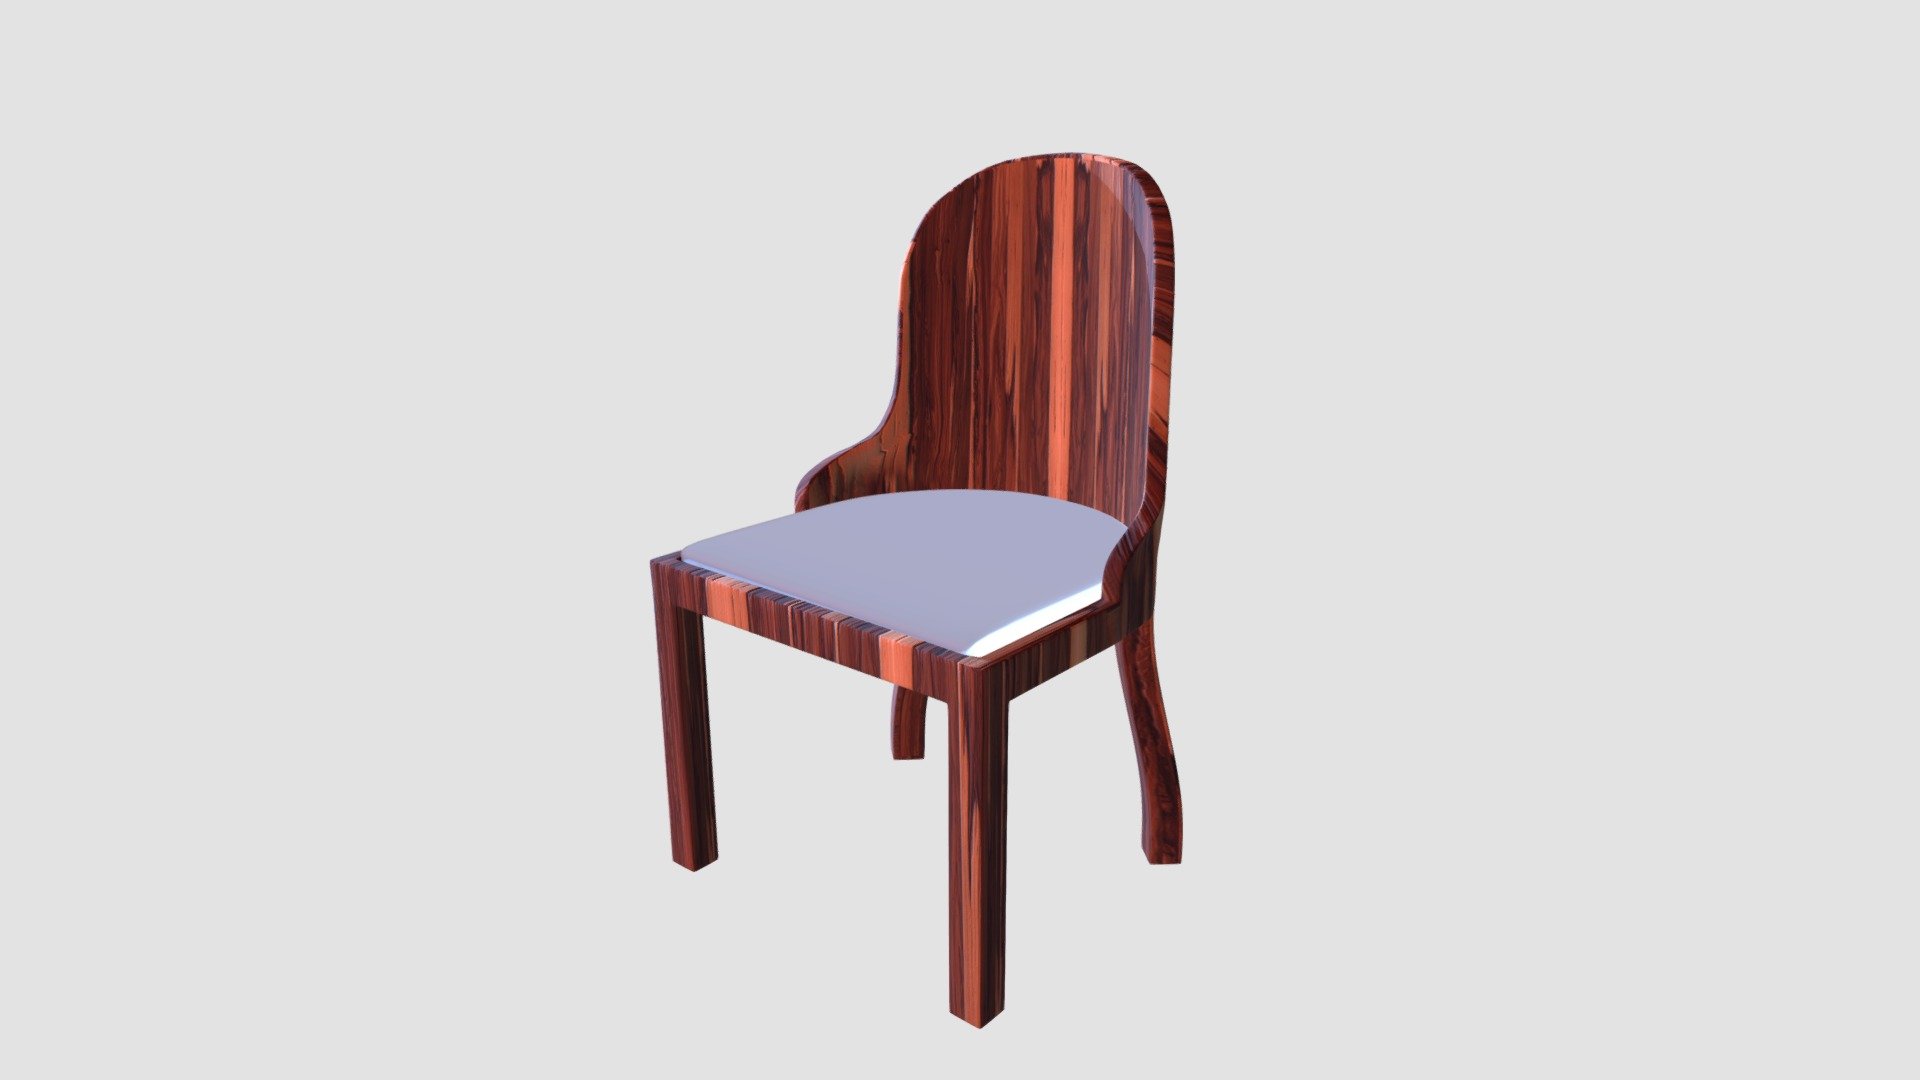 Highly detailed 3d model of chair with all textures, shaders and materials. It is ready to use, just put it into your scene 3d model